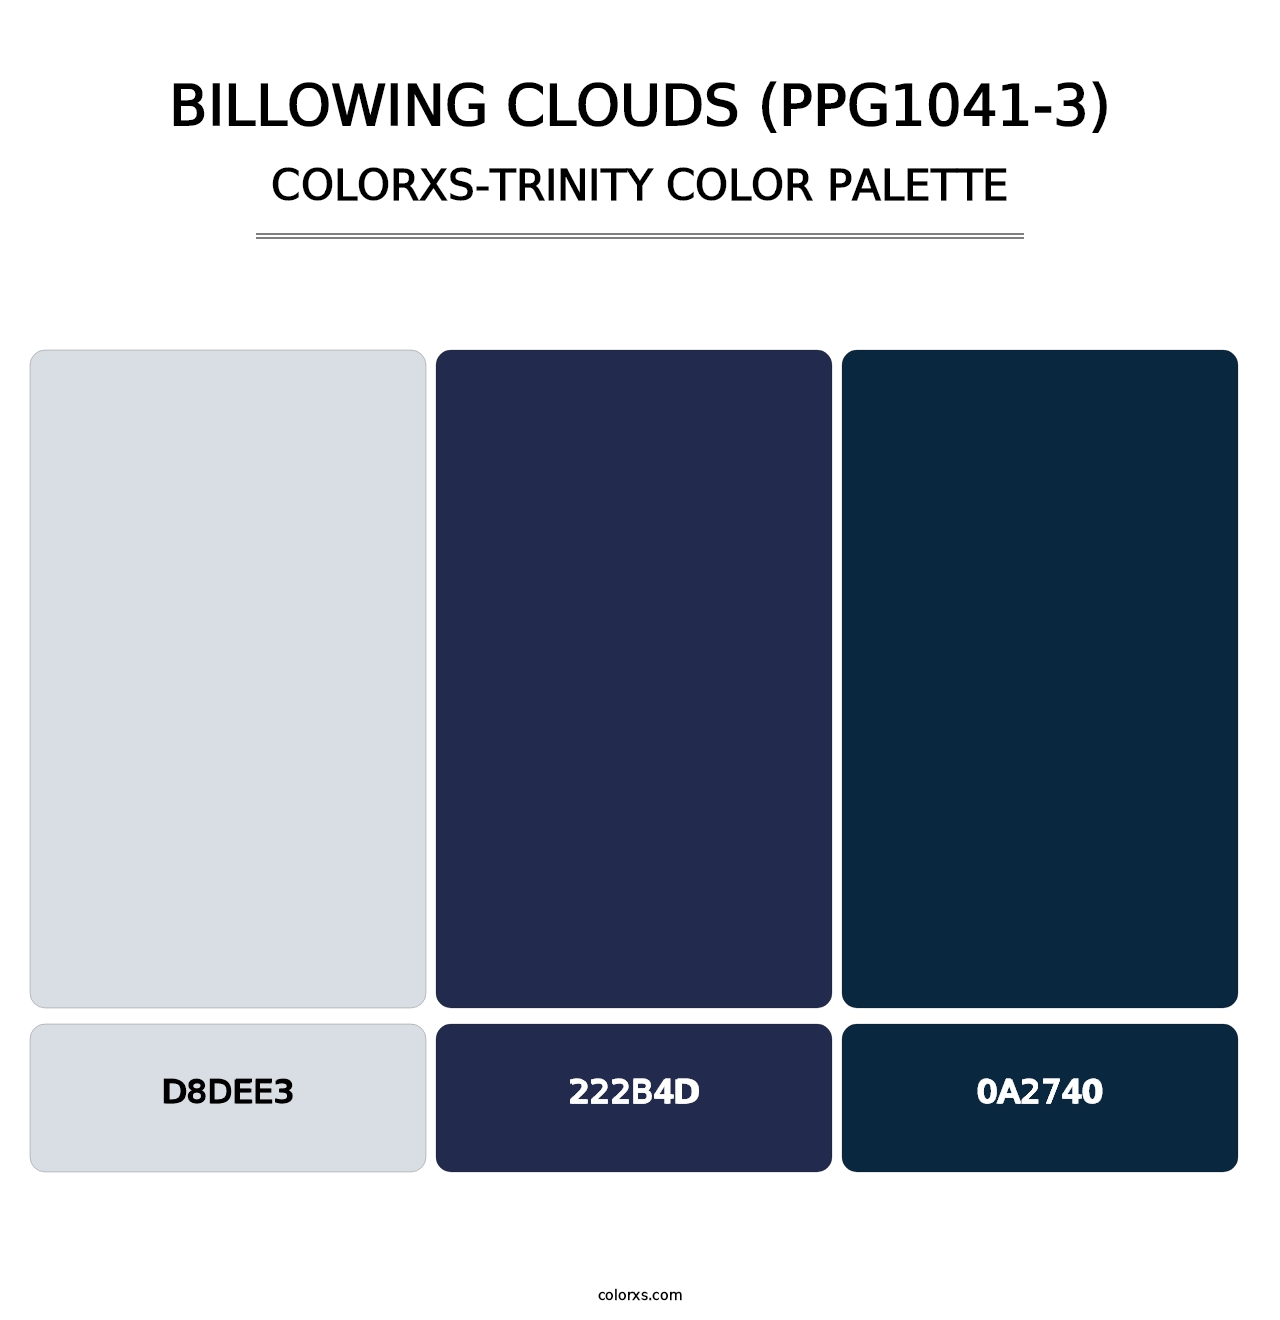 Billowing Clouds (PPG1041-3) - Colorxs Trinity Palette